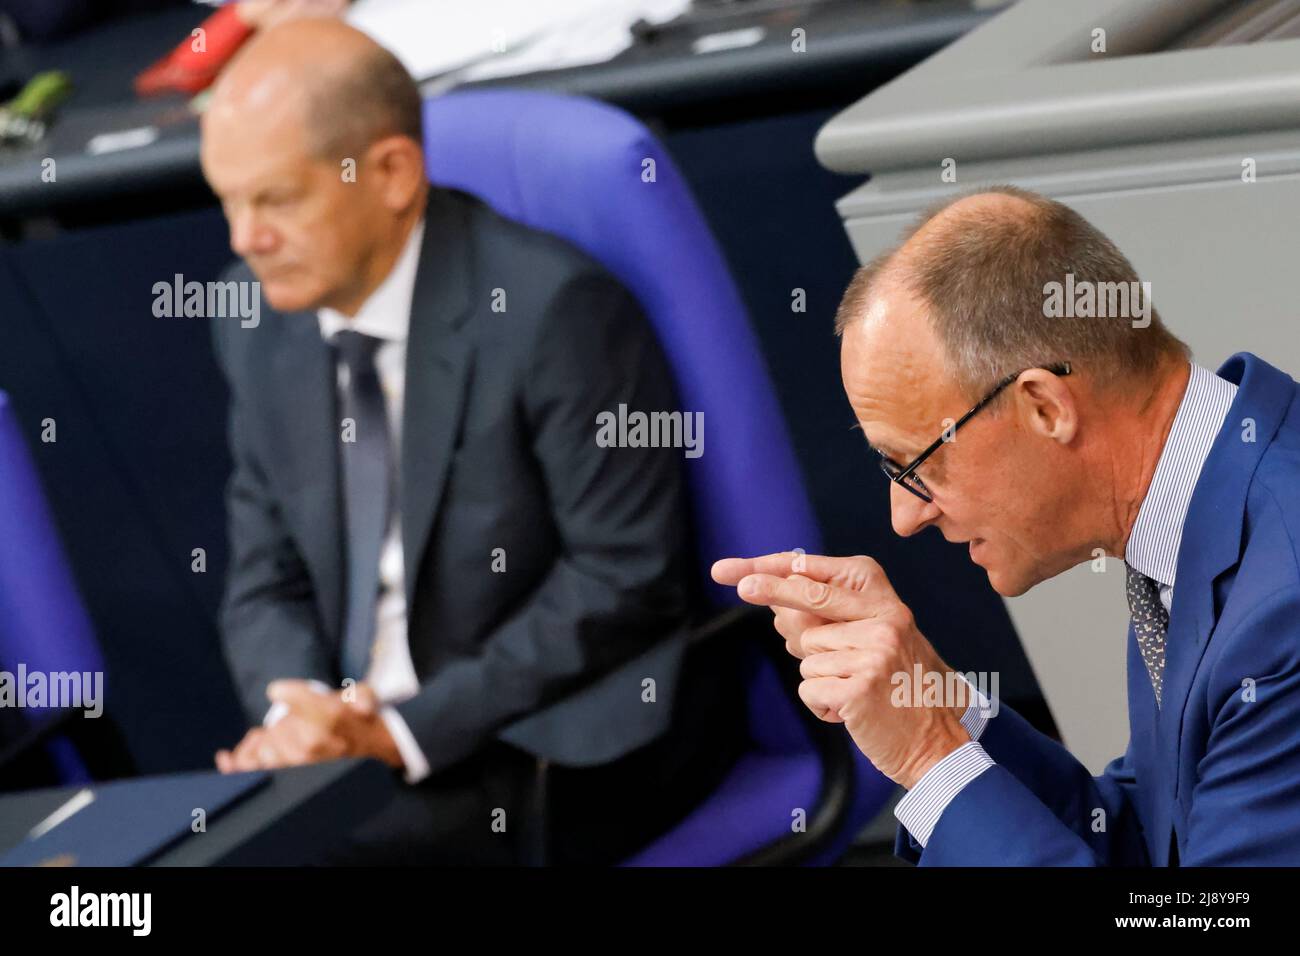 Leader of Germany's Christian Democratic Union (CDU) Friedrich Merz speaks as German Chancellor Olaf Scholz listens during a session of Germany's lower house of parliament, the Bundestag, in Berlin, Germany, May 19, 2022. REUTERS/Hannibal Hanschke Stock Photo